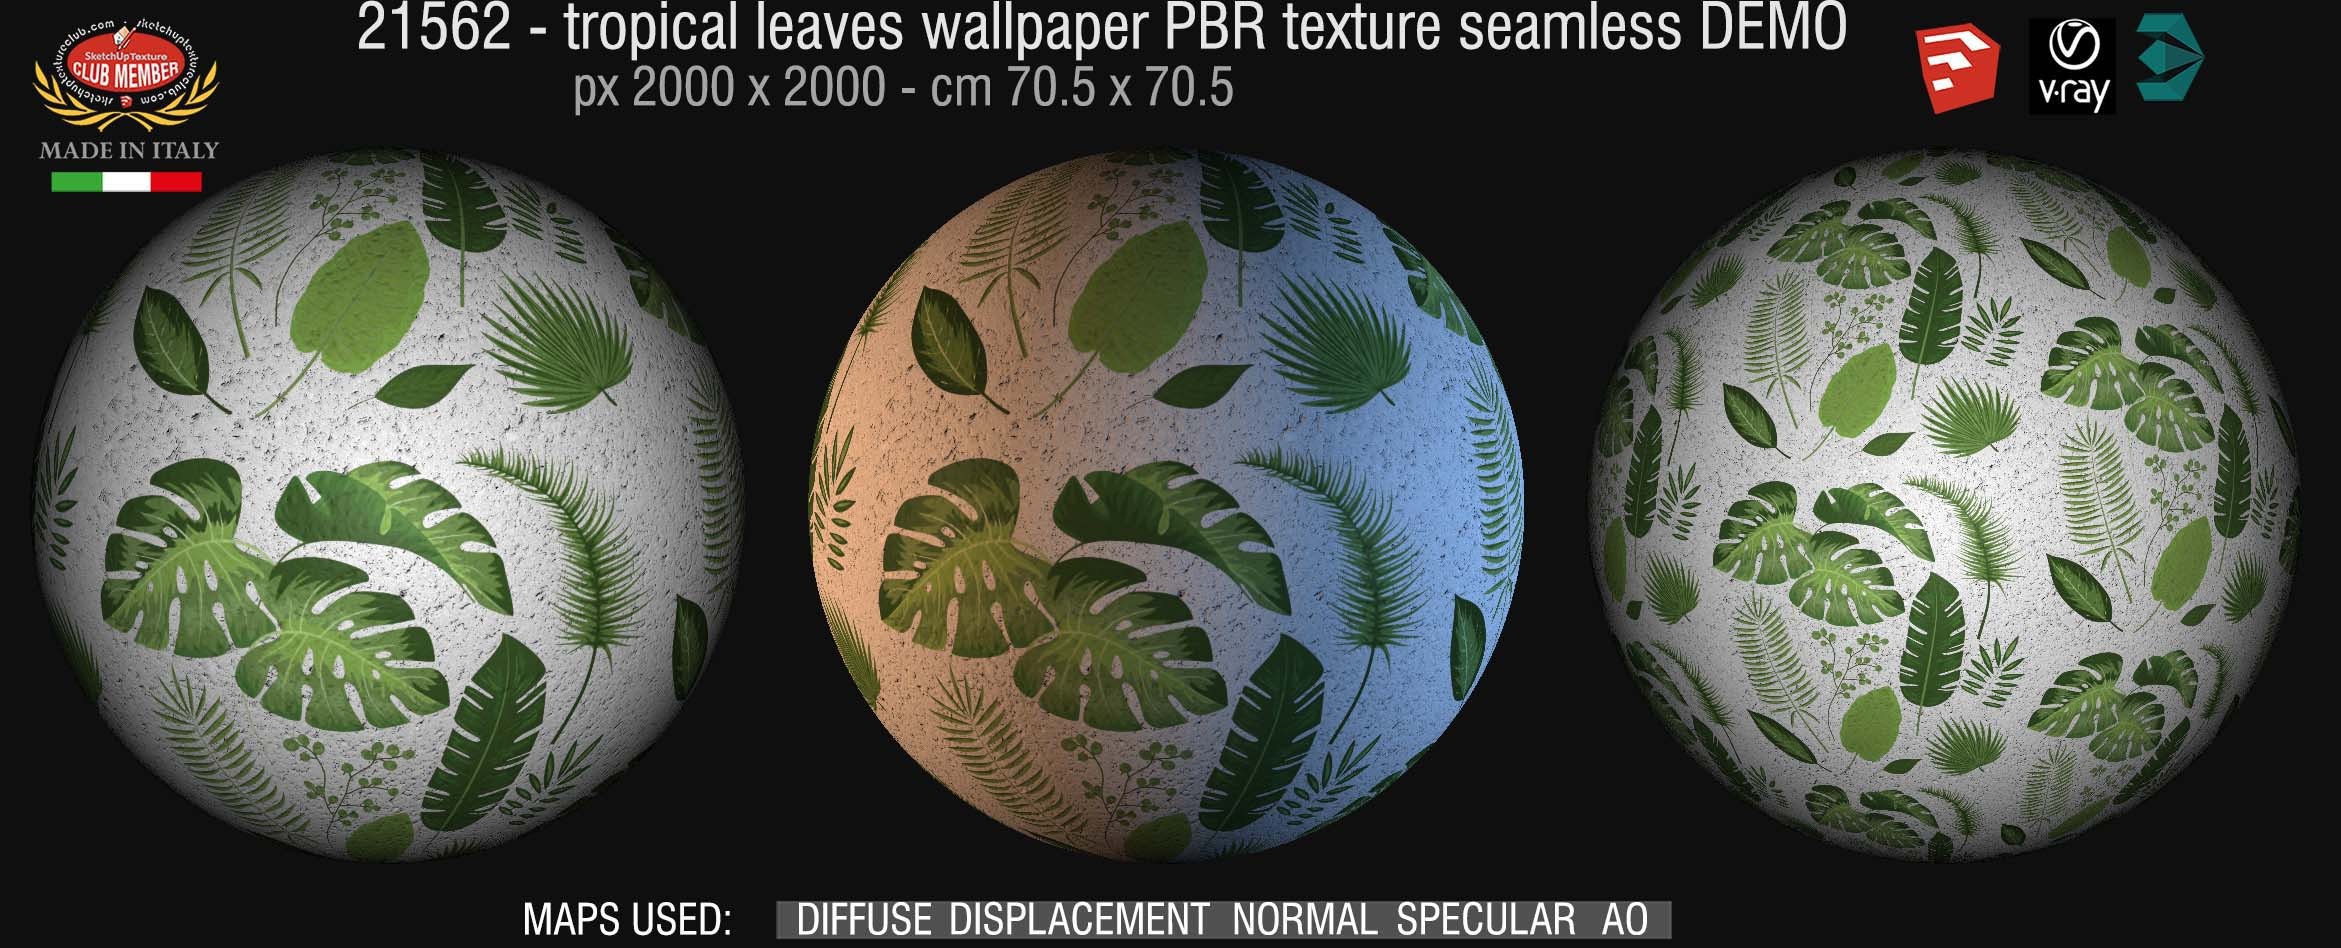 21562 Tropical leaves wallpaper PBR texture seamless